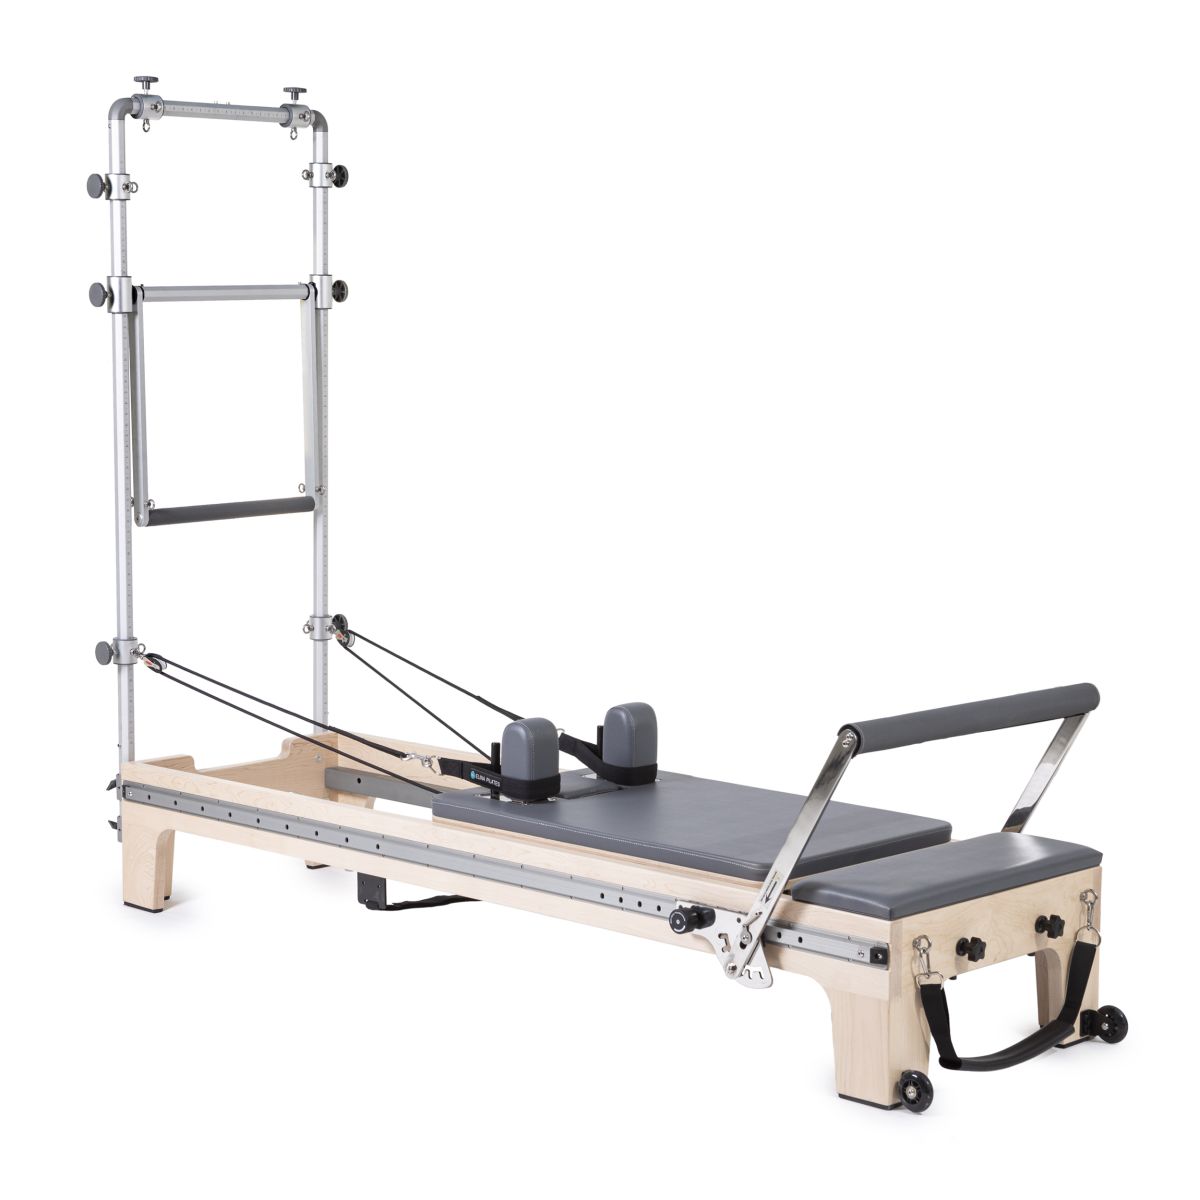 Buy Basi Systems Wood Pilates Reformer with Free Shipping